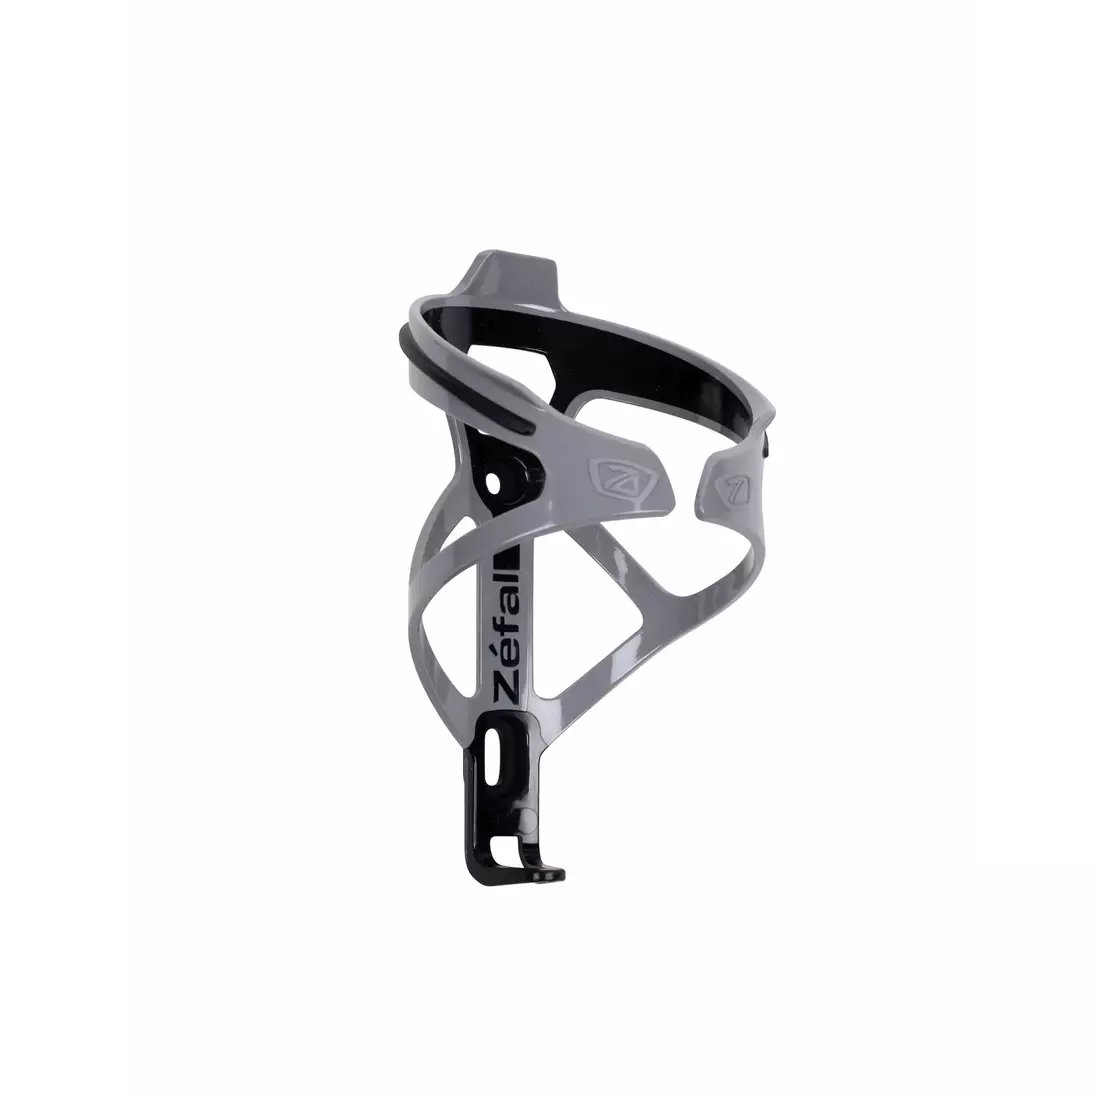 ZEFAL PULSE B2 bicycle bottle cage, gray